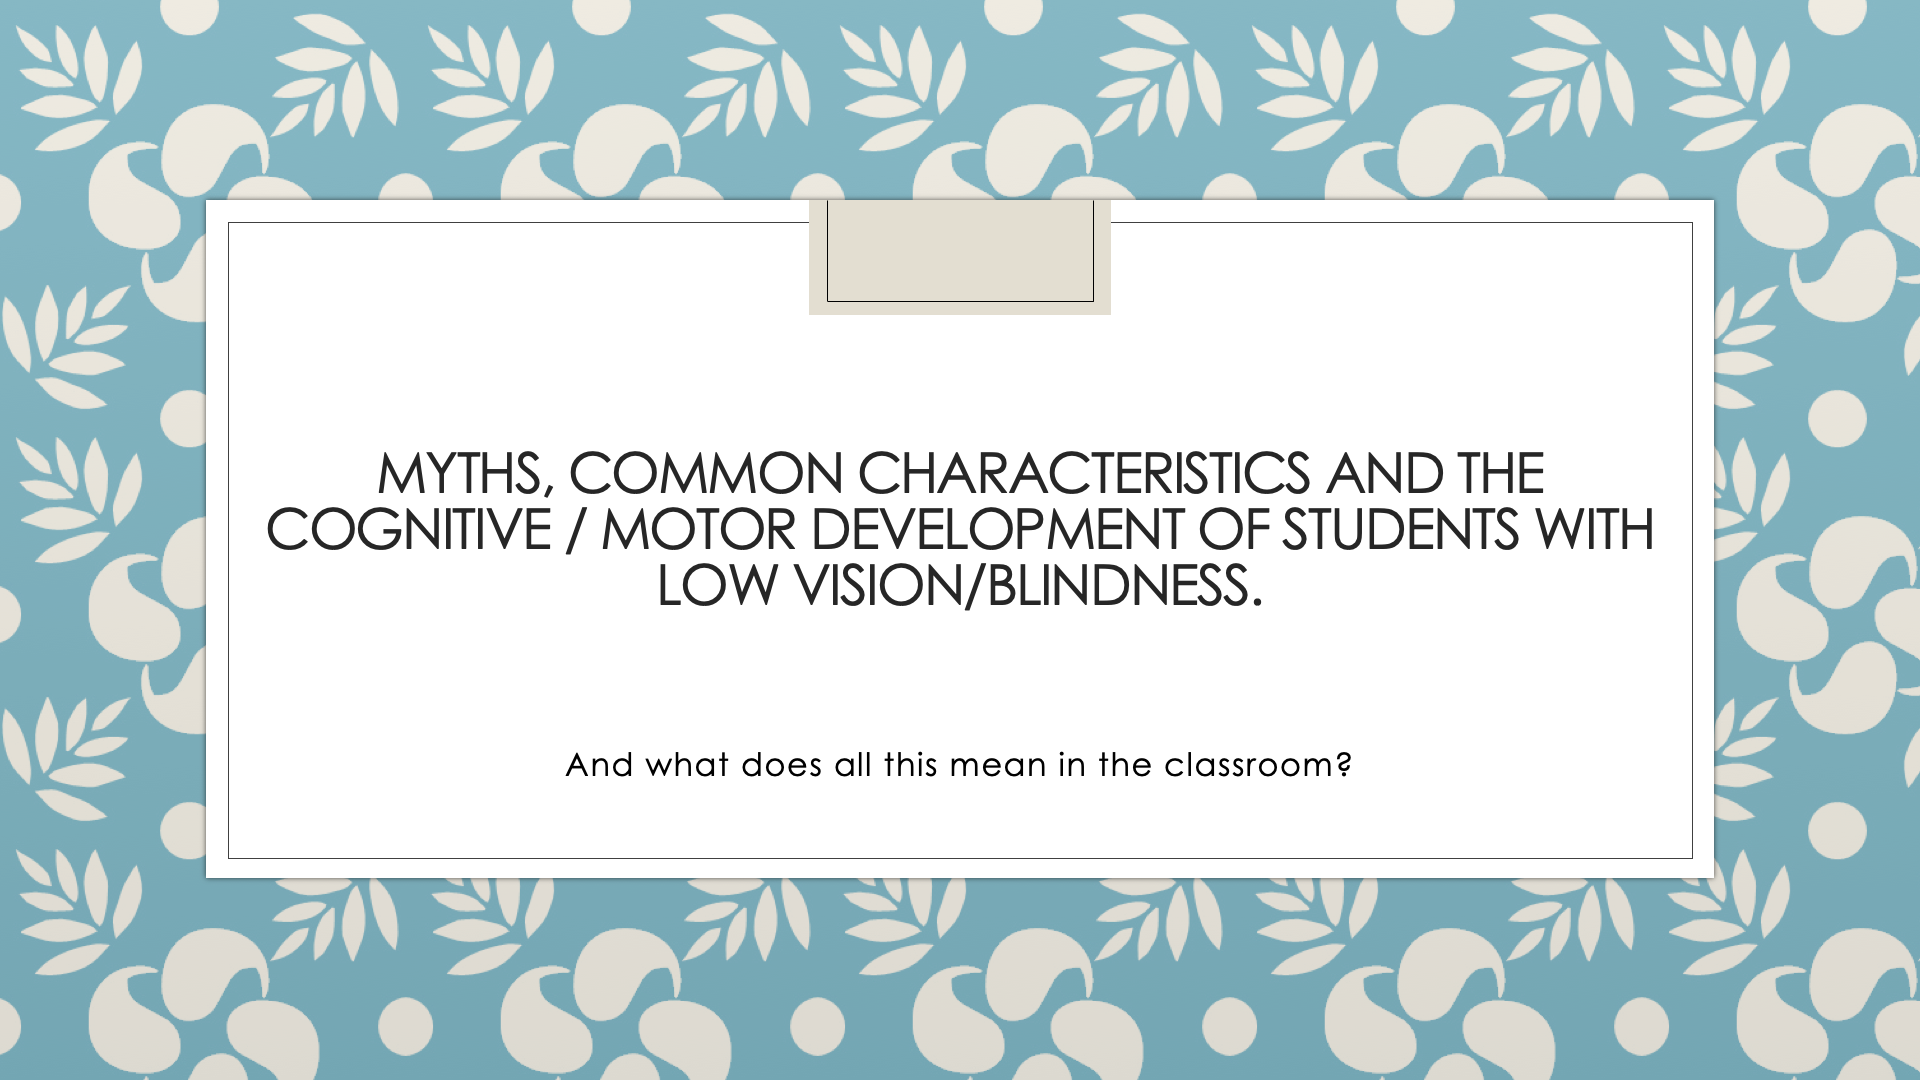 Myths, common characteristics and the cognitive / motor development of students with low vision/blindness.